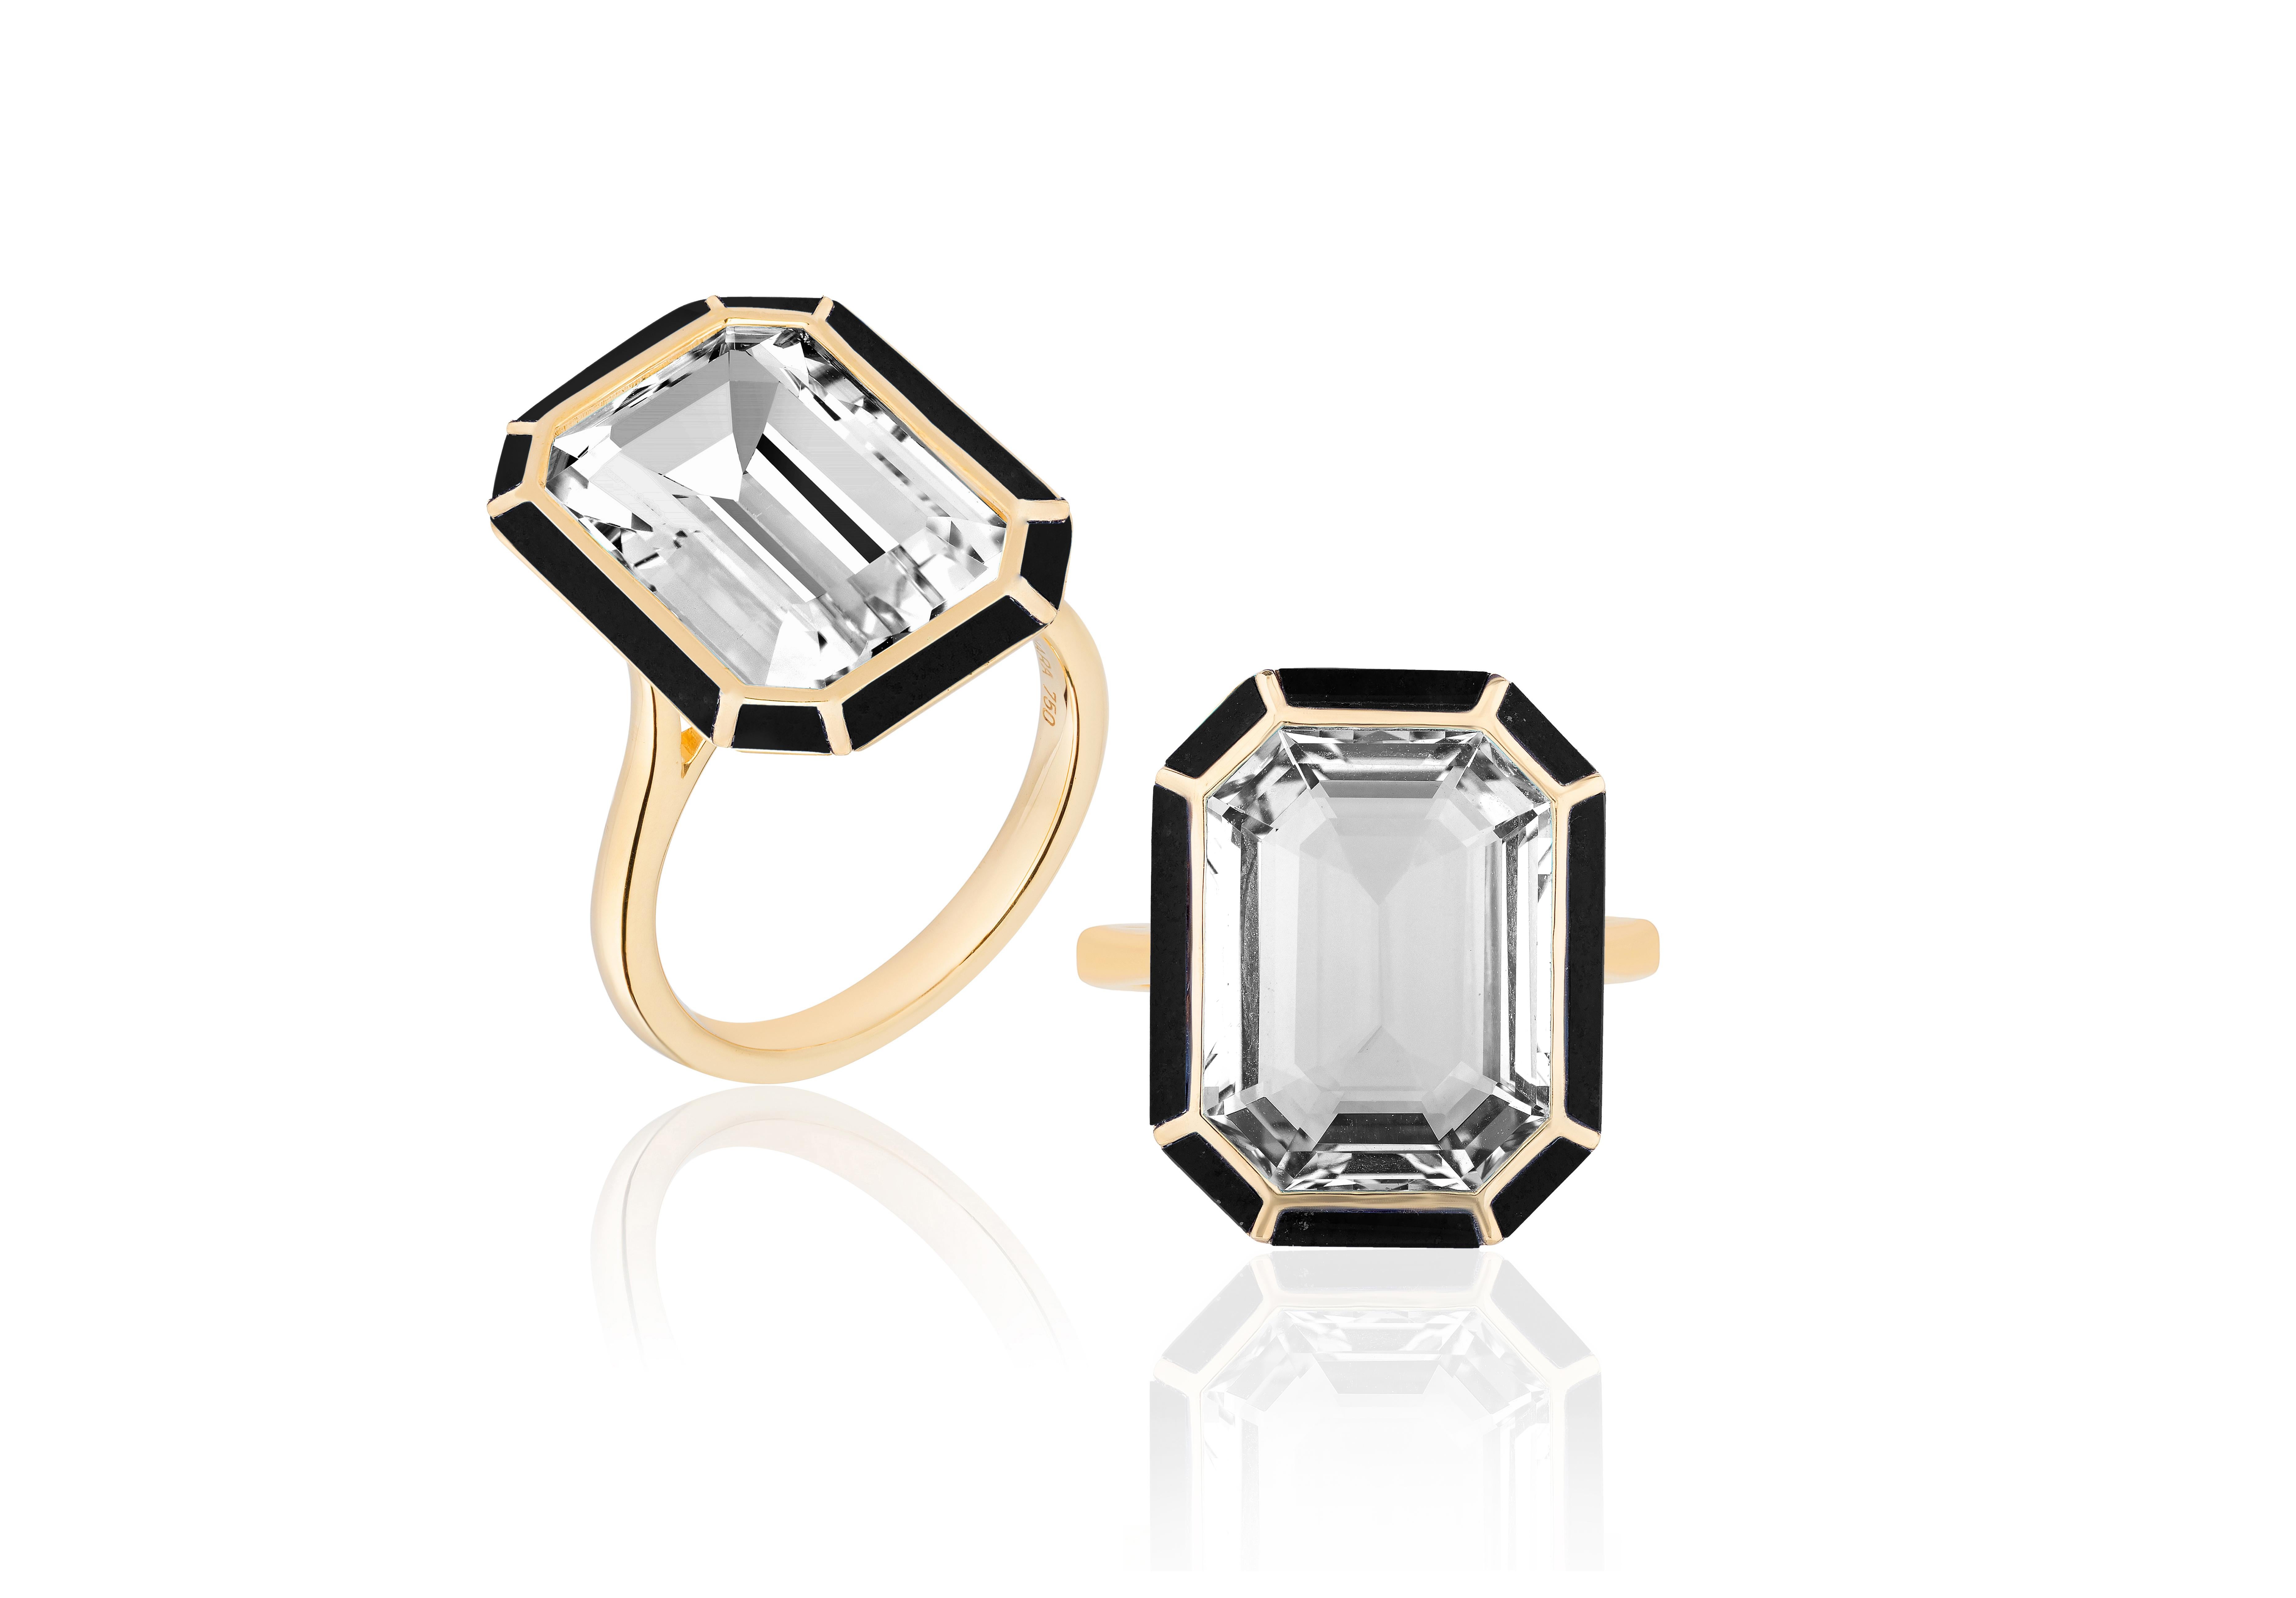 Rock Crystal and Onyx Emerald Cut Ring in 18K Yellow Gold, from 'Mélange' Collection.

Beautifully crafted, these special pieces from Goshwara are not to be missed!

* Gemstone: 100% Earth Mined 
* Approx. gemstone Weight: 16 Carats (Rock Crystal);